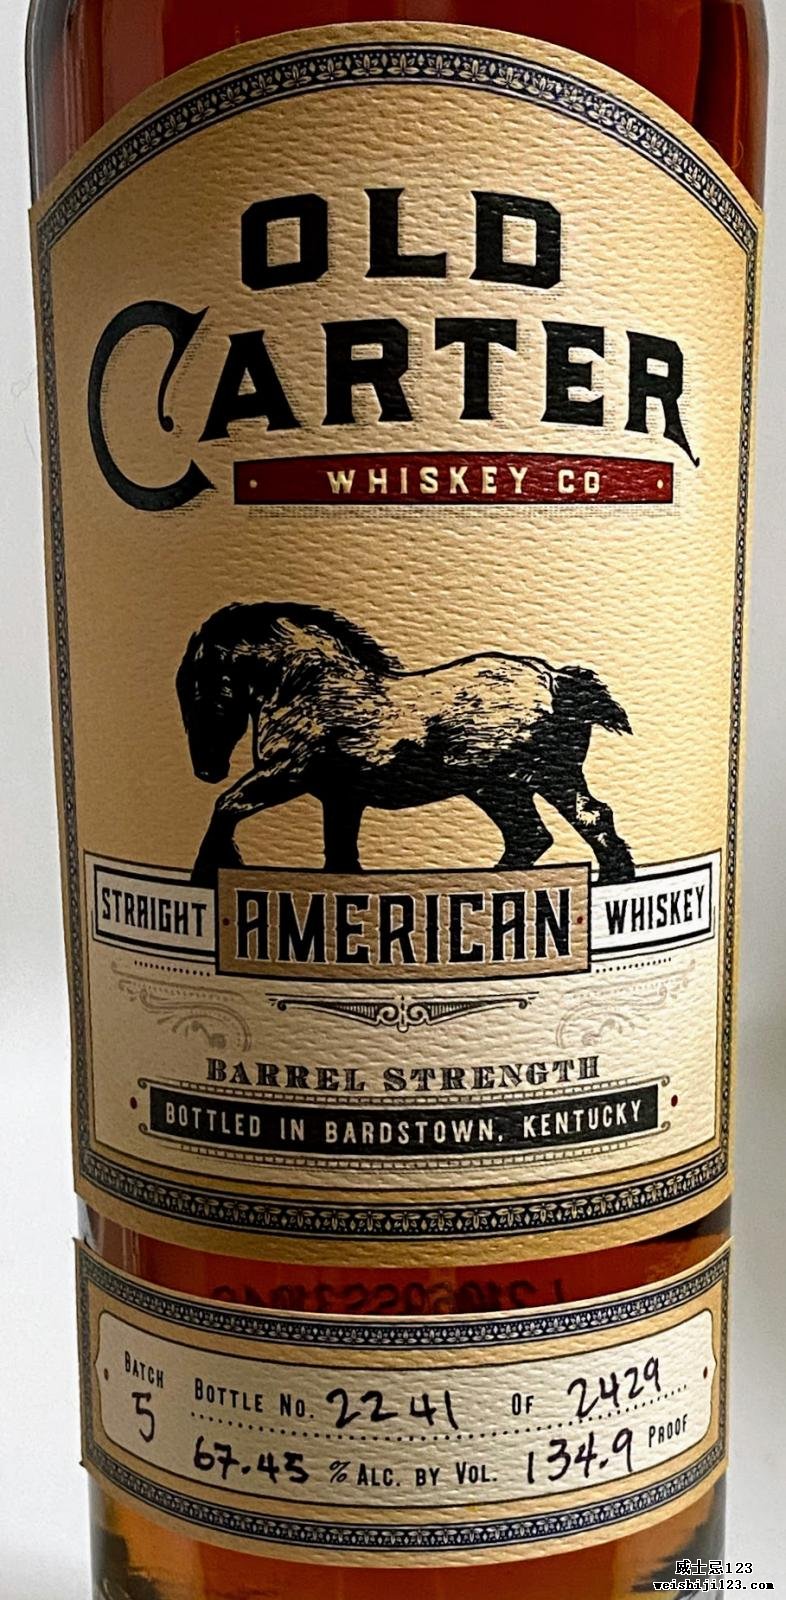 Old Carter Straight American Whiskey